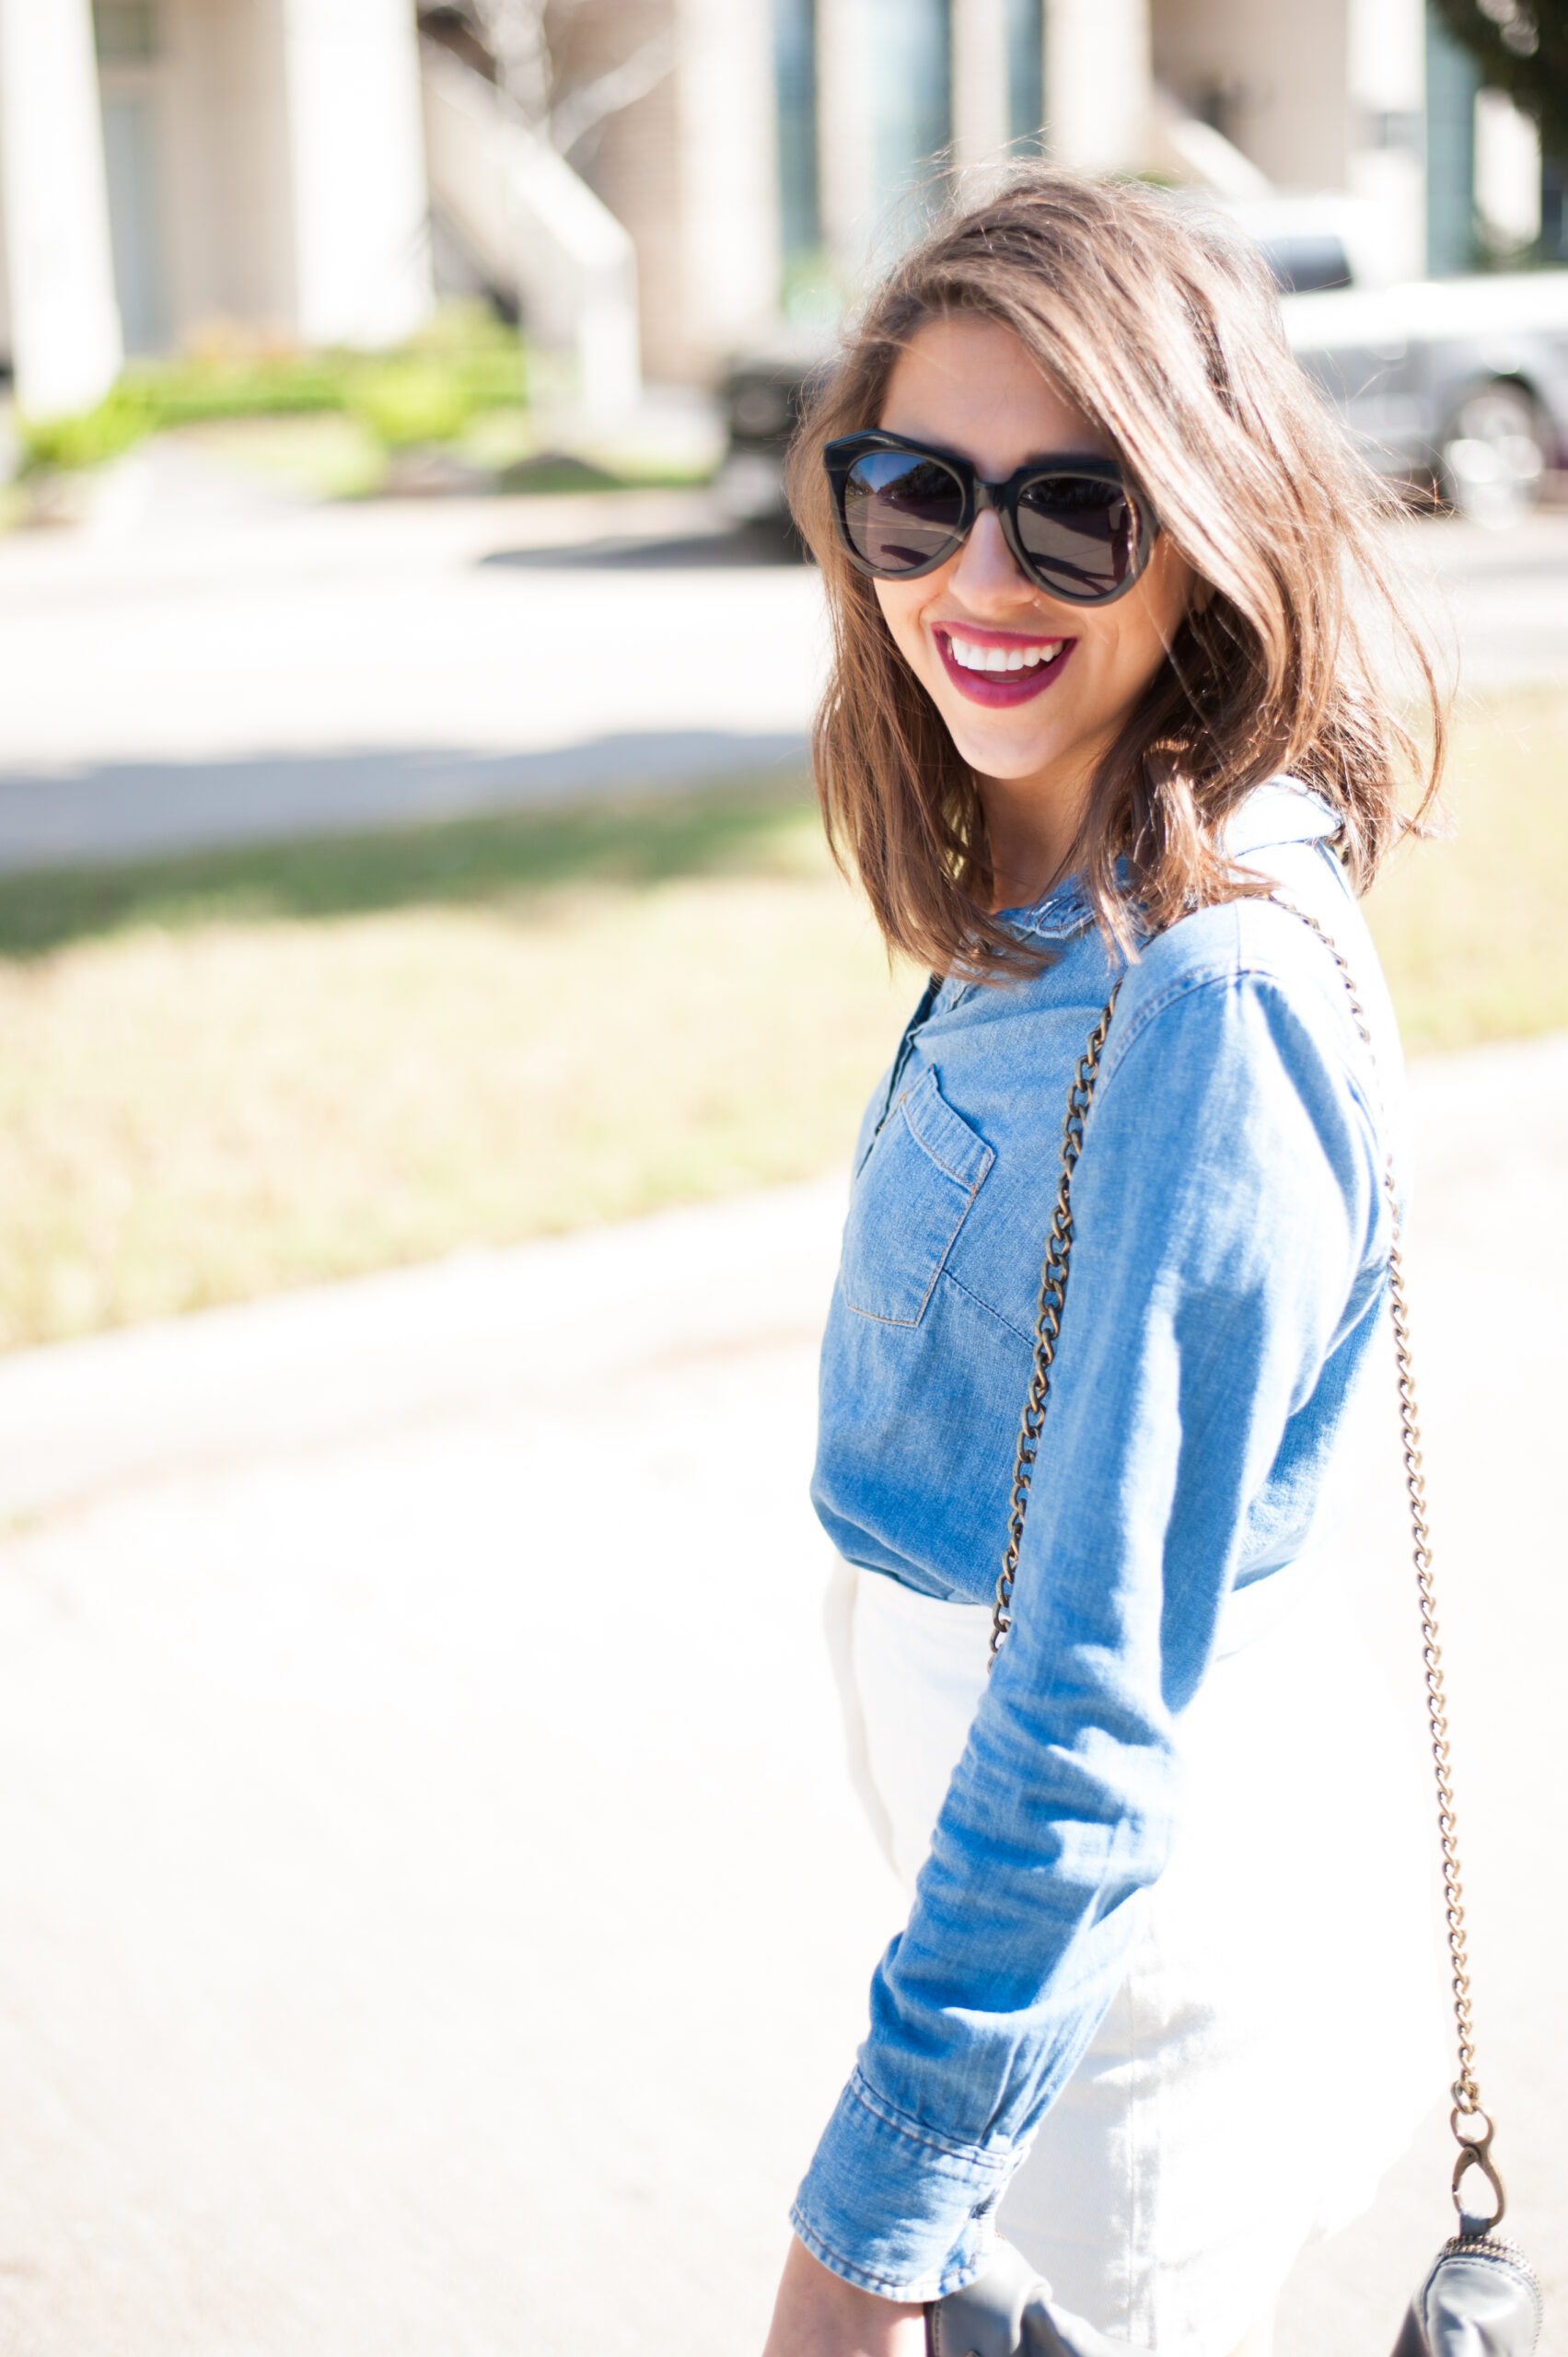 dress_up_buttercup_dede_raad_fashion_blogger_houston (10 of 10)